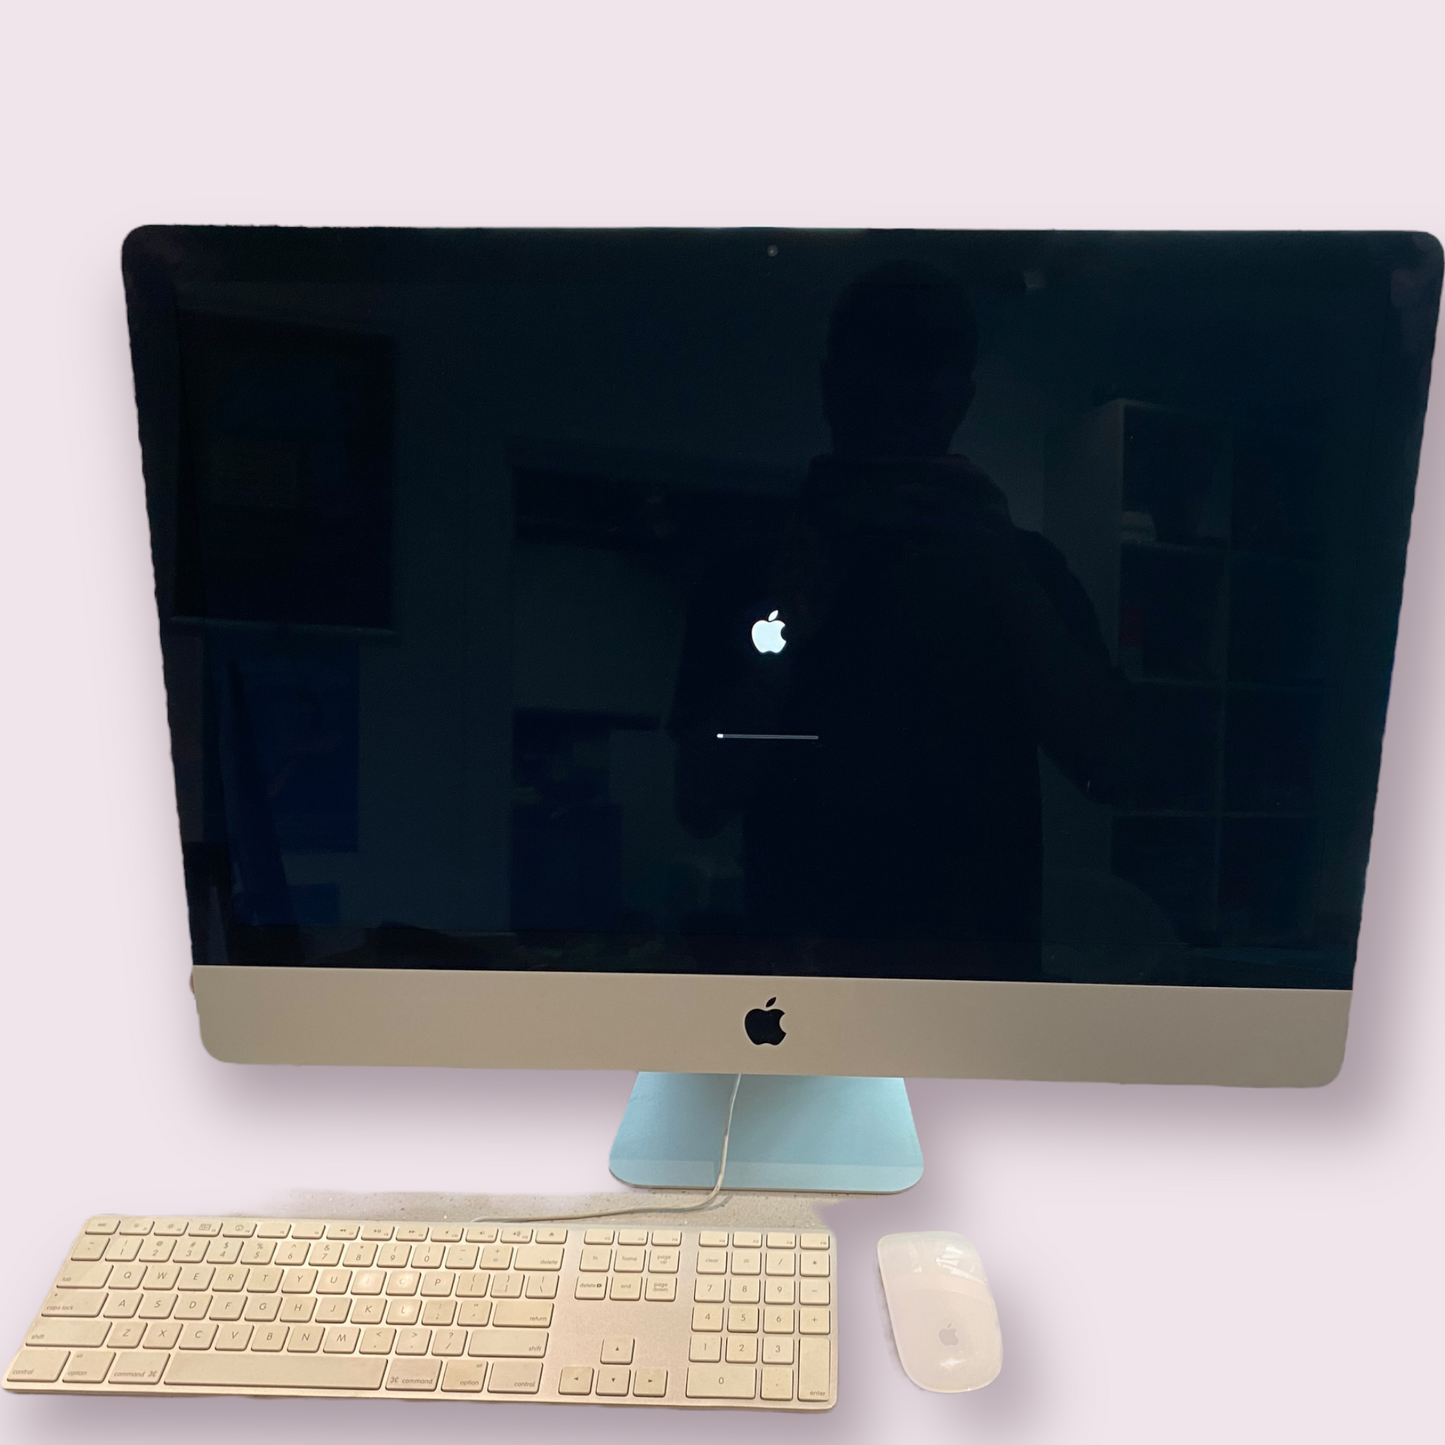 Apple iMac 27” Late 2013 i5 @ 3.2GHz 1TB HDD 8GB RAM Max OS Catalina With Keyboard and Mouse